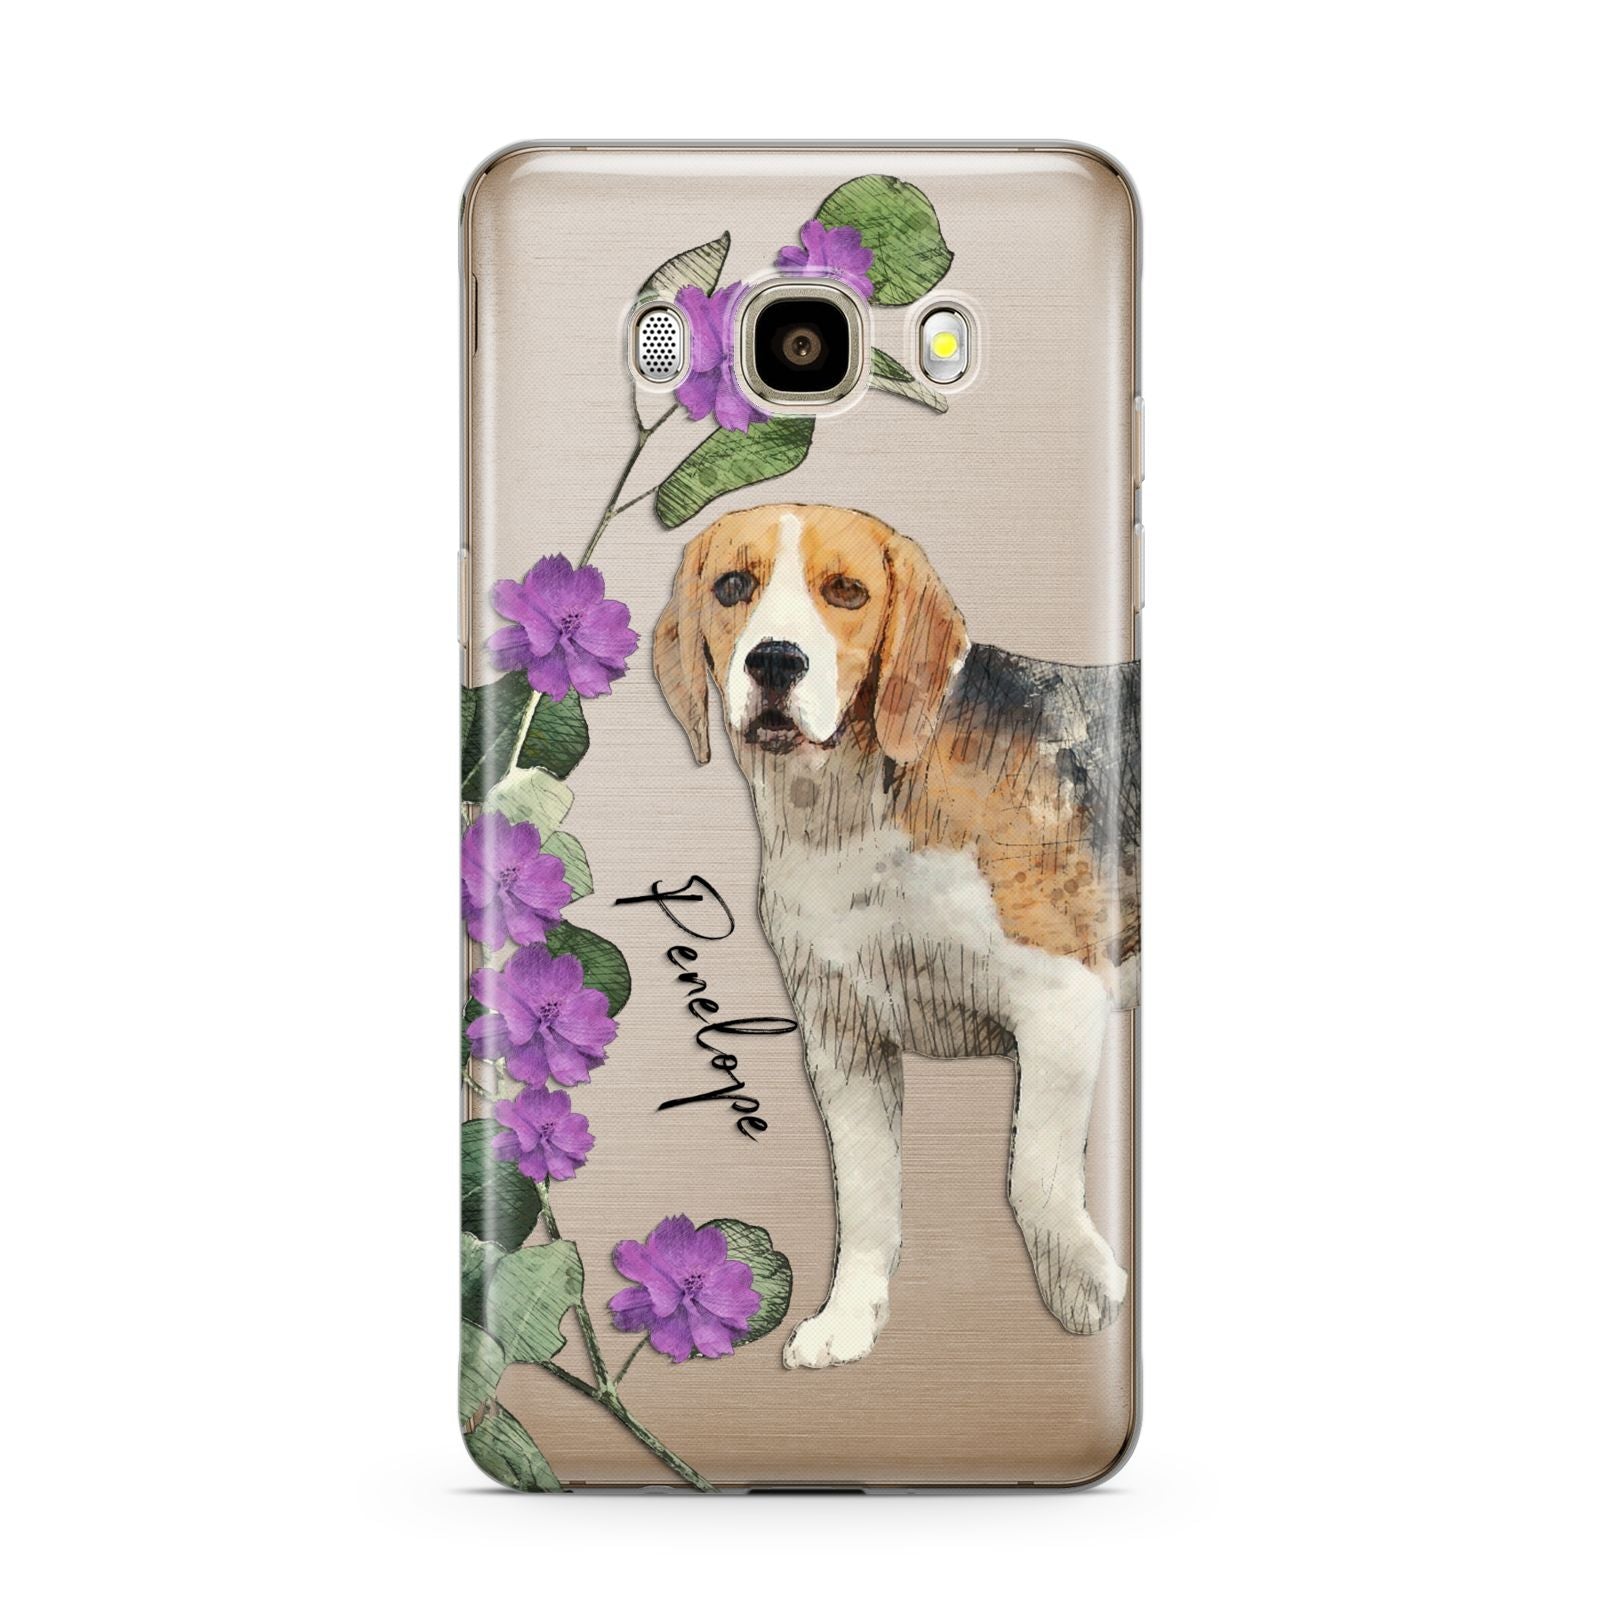 Personalised Dog Samsung Galaxy J7 2016 Case on gold phone